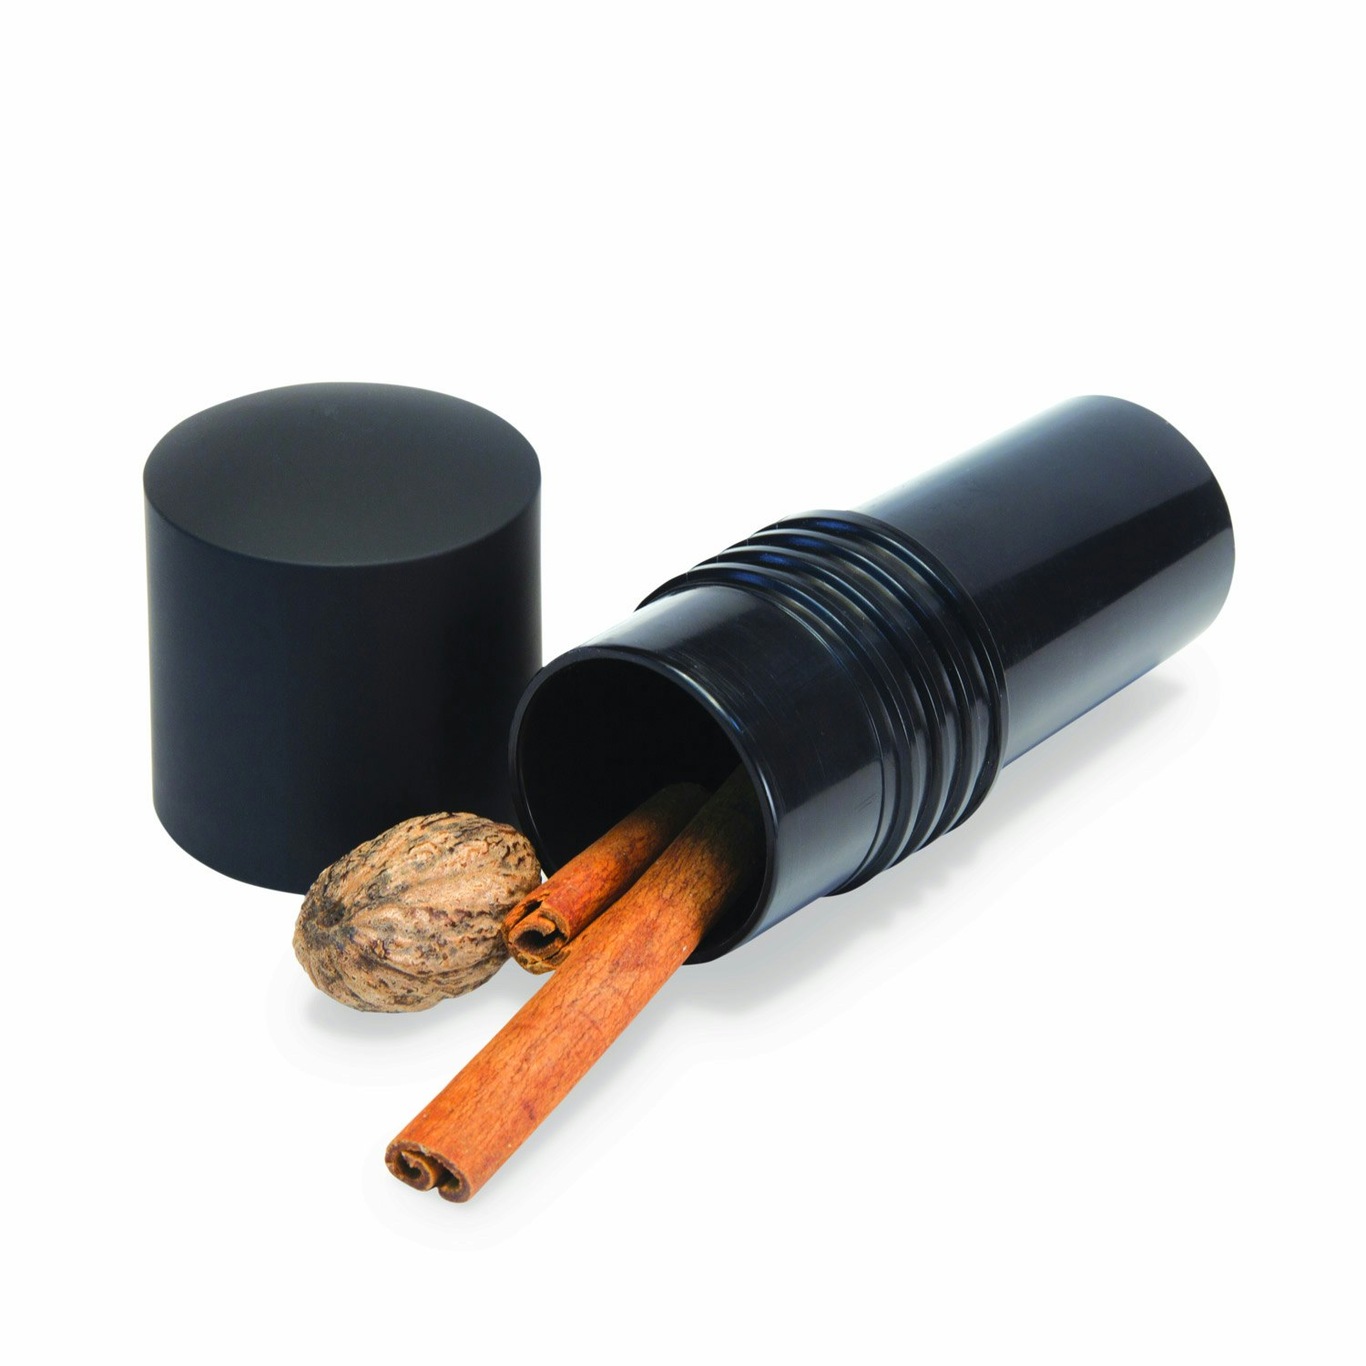 https://royaldesign.com/image/2/microplane-spice-mill-for-nutmeg-and-cinnamon-black-3?w=800&quality=80